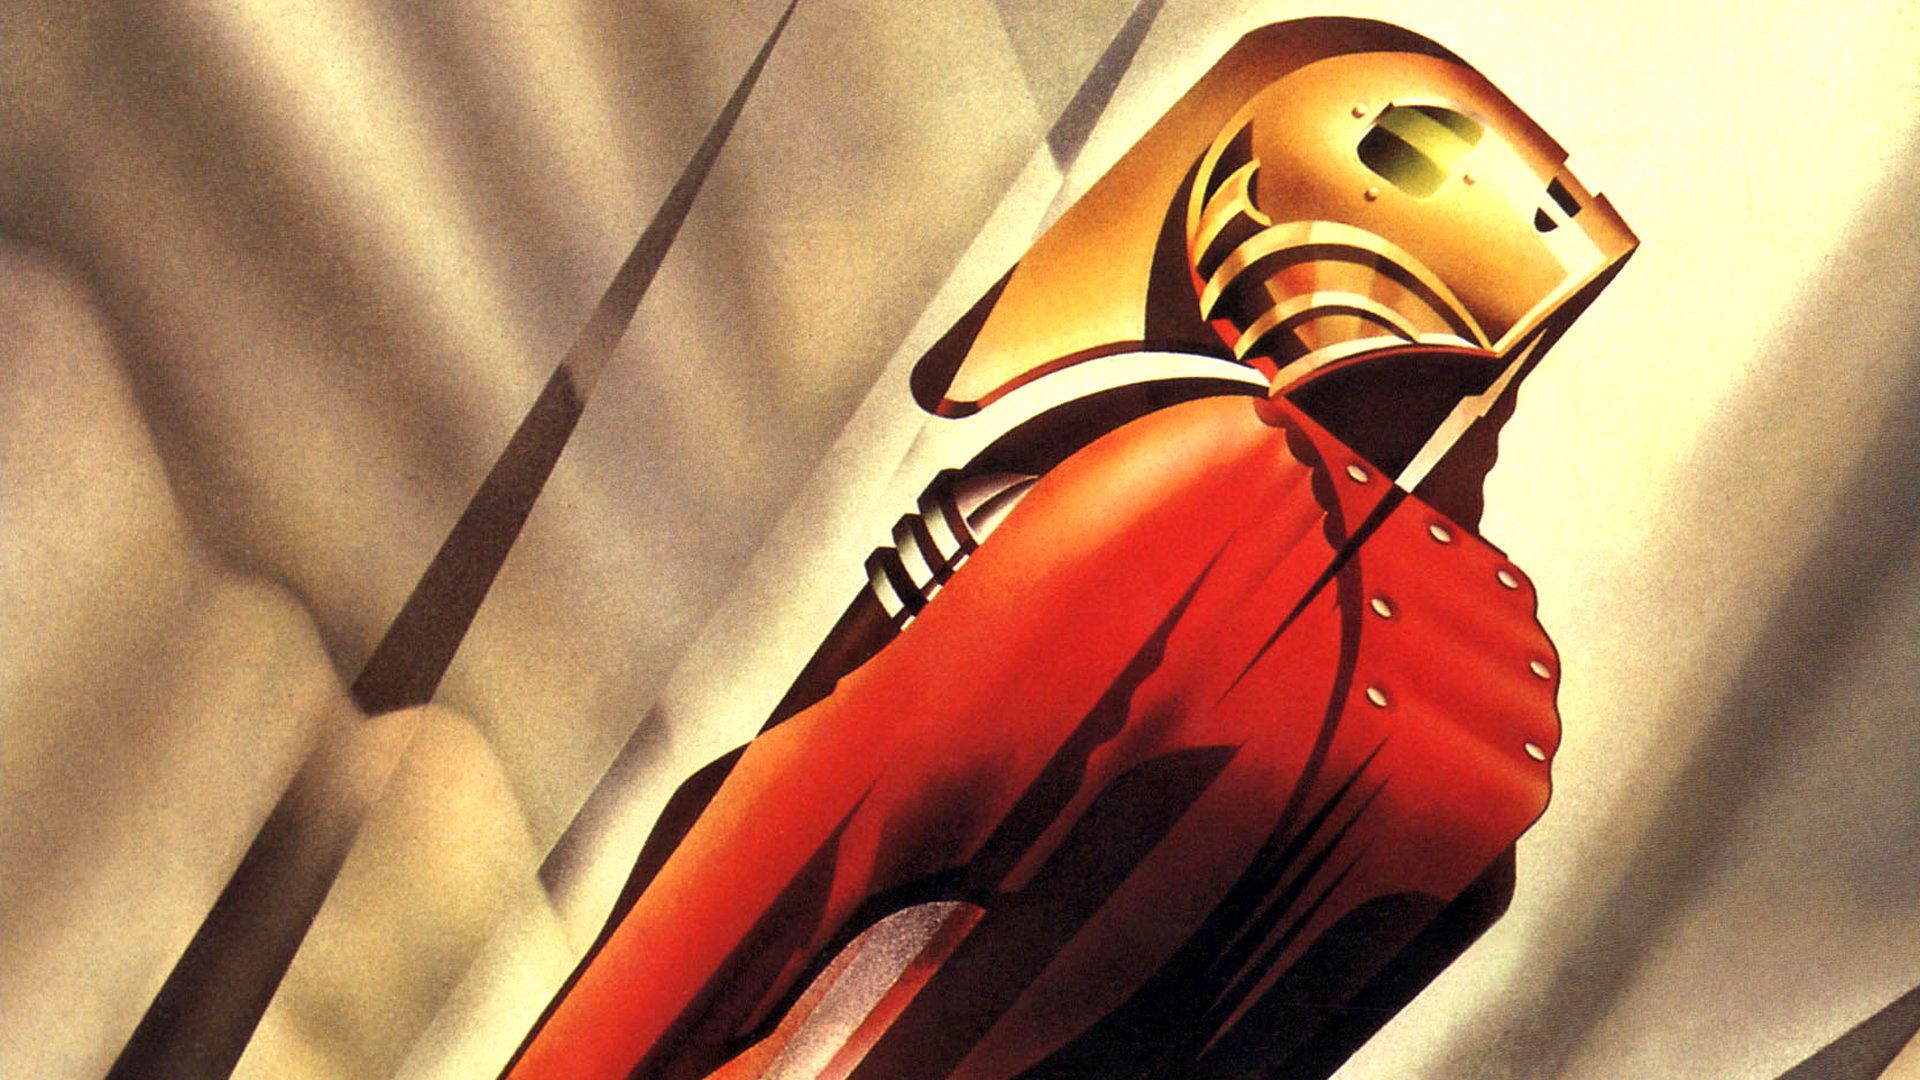 Rocketeer Backgrounds, Compatible - PC, Mobile, Gadgets| 1920x1080 px